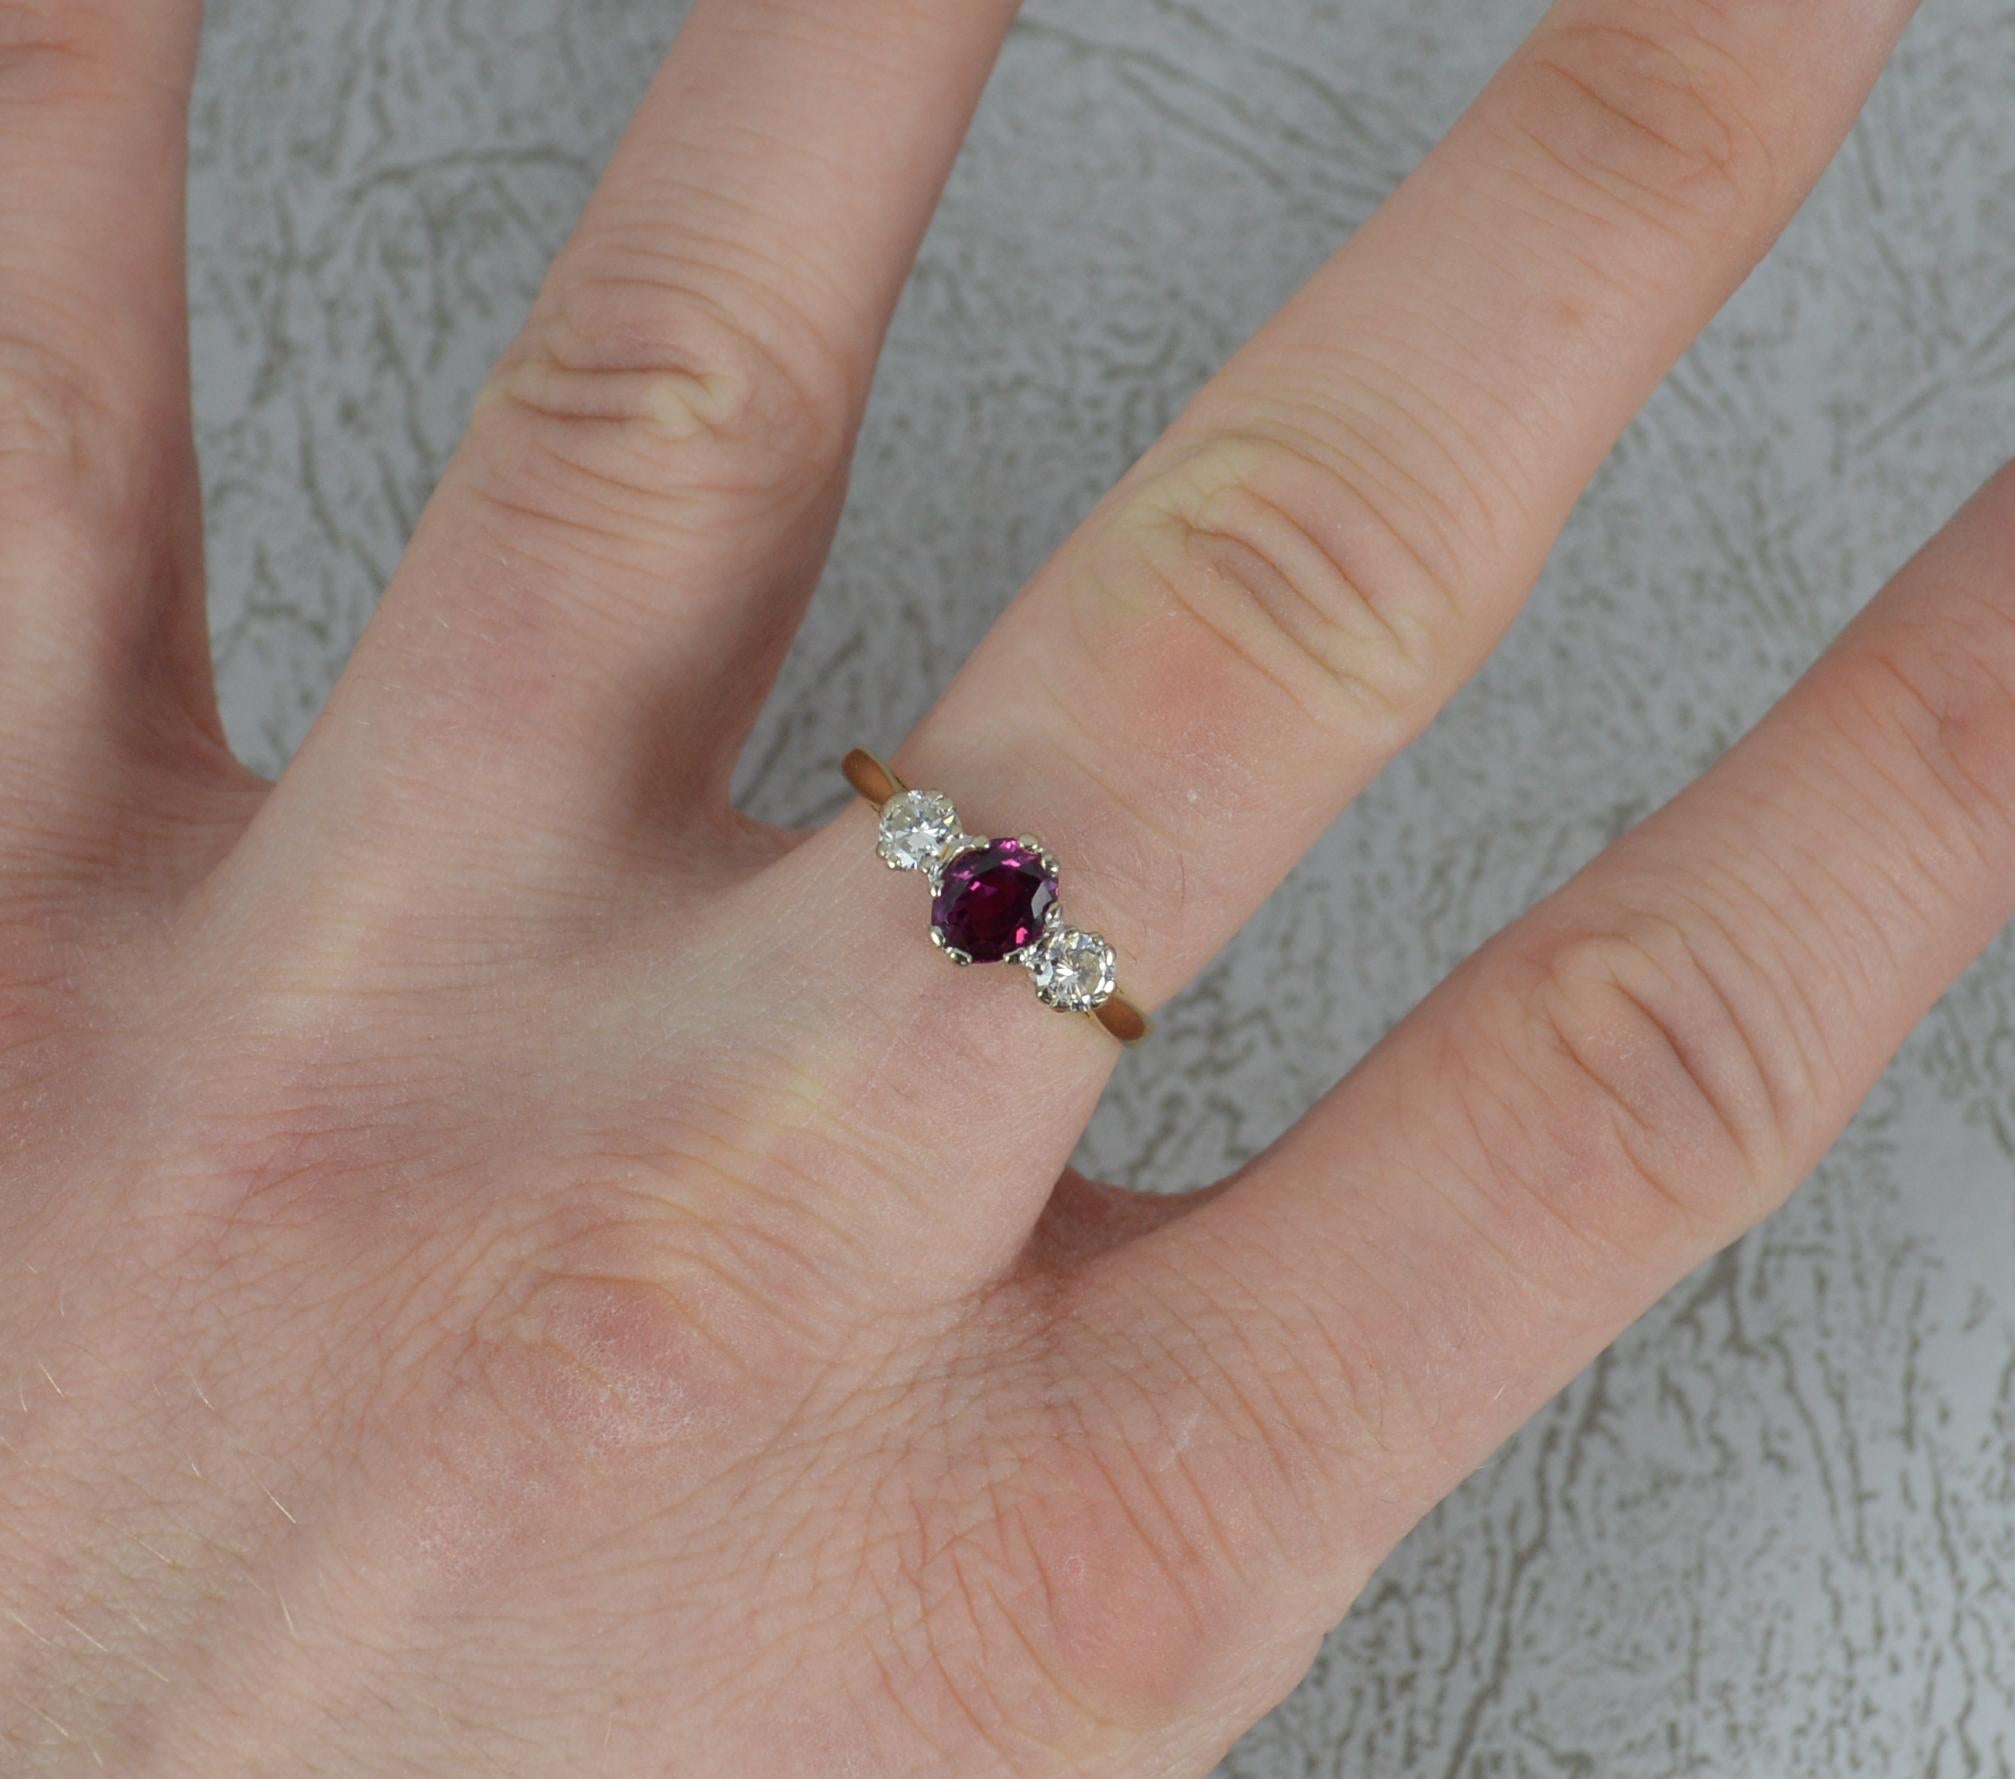 A superb Ruby and Diamond ring, circa 1940.
18 carat yellow gold shank and platinum double claw setting.
Designed with a very vibrant natural oval ruby to centre with a vs diamond to each side. 5mm x 6mm ruby. 0.2 carat diamond to each side.
13.2mm